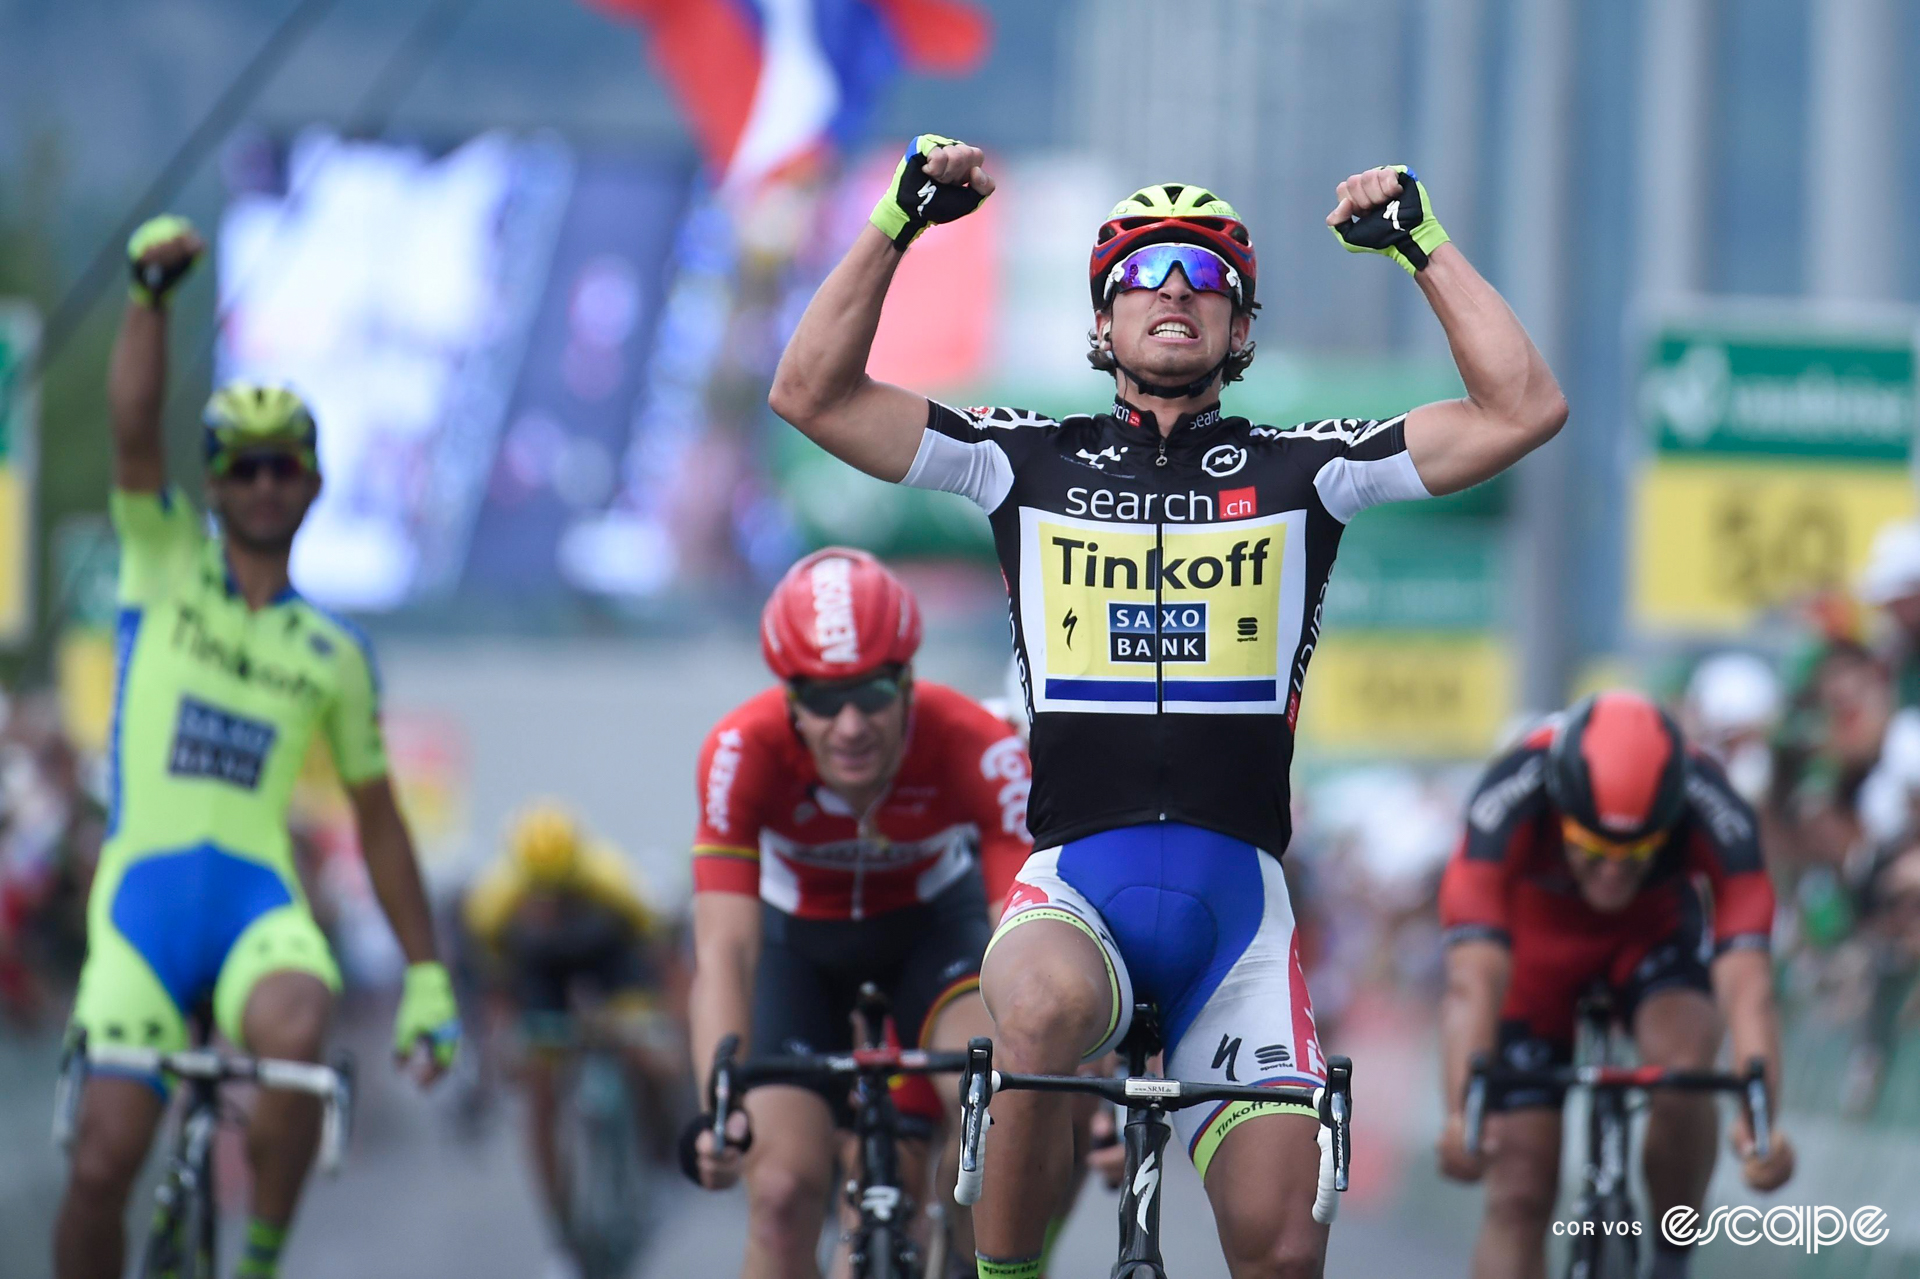 Peter Sagan celebrates winning a stage at the 2015 Tour de Suisse with a double overhead fist pump as a teammate celebrates out of focus in the background.